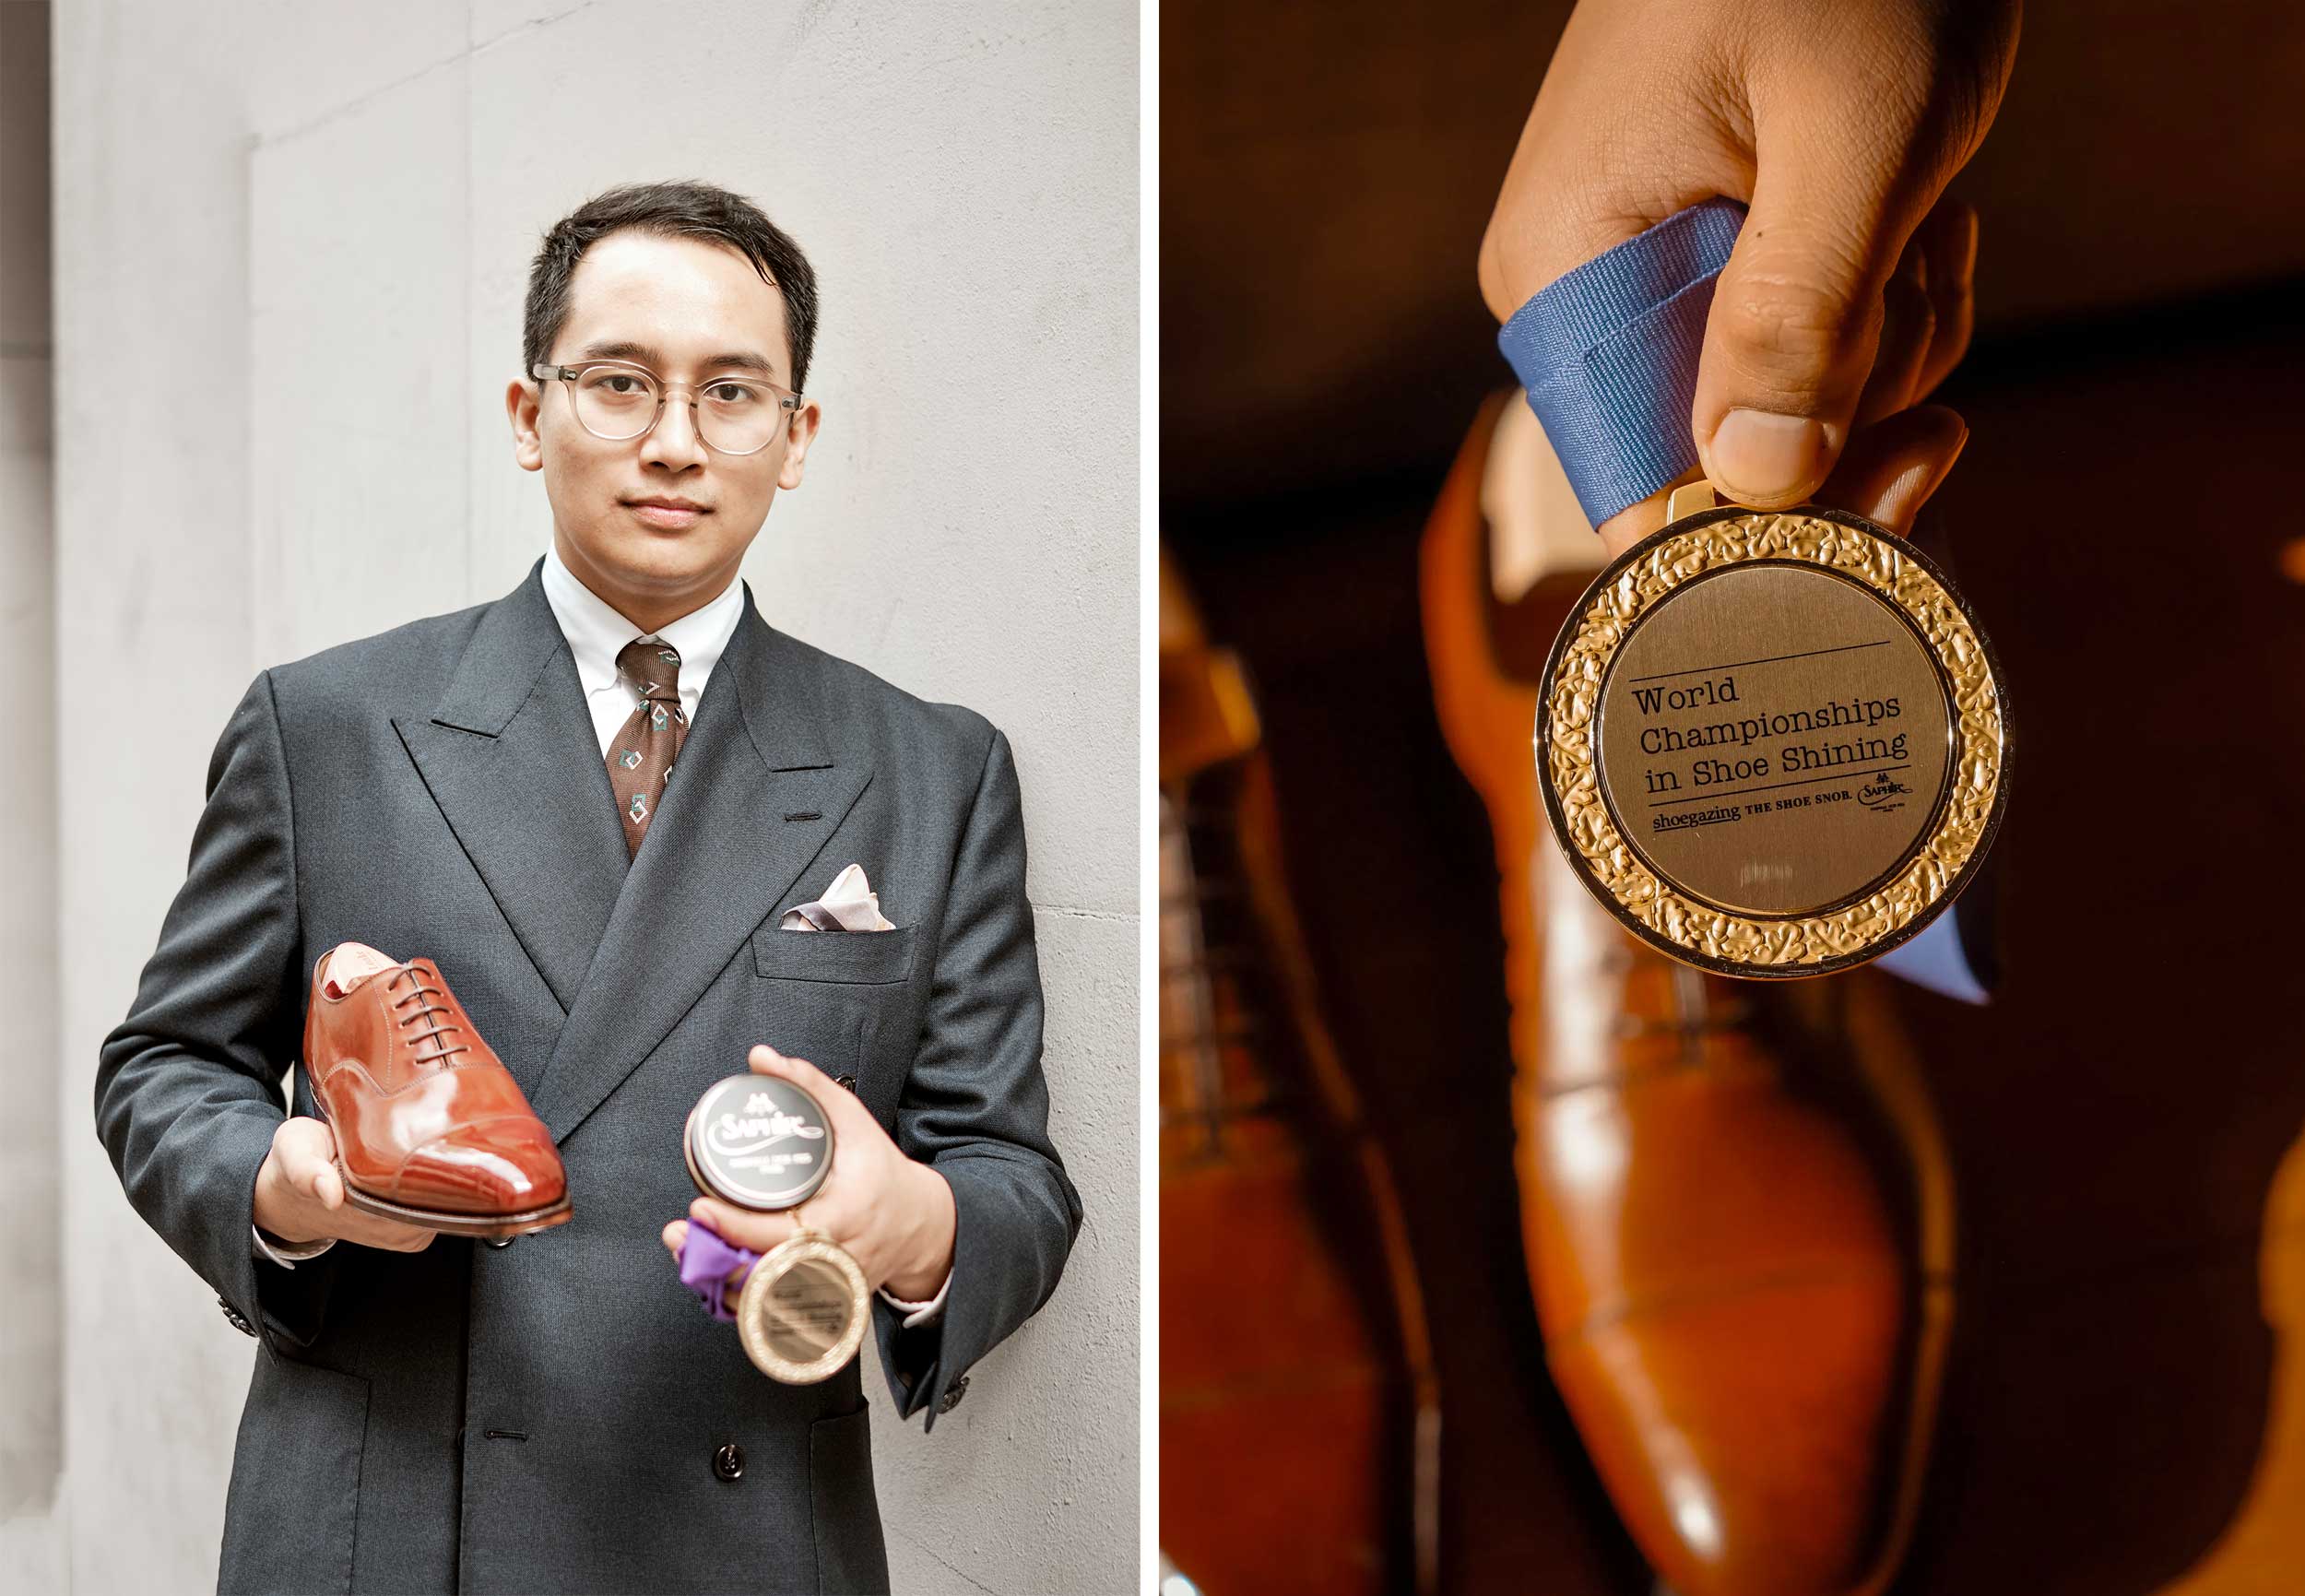 The world champion in shoe shining of 2022 Ash Sam from Singapore